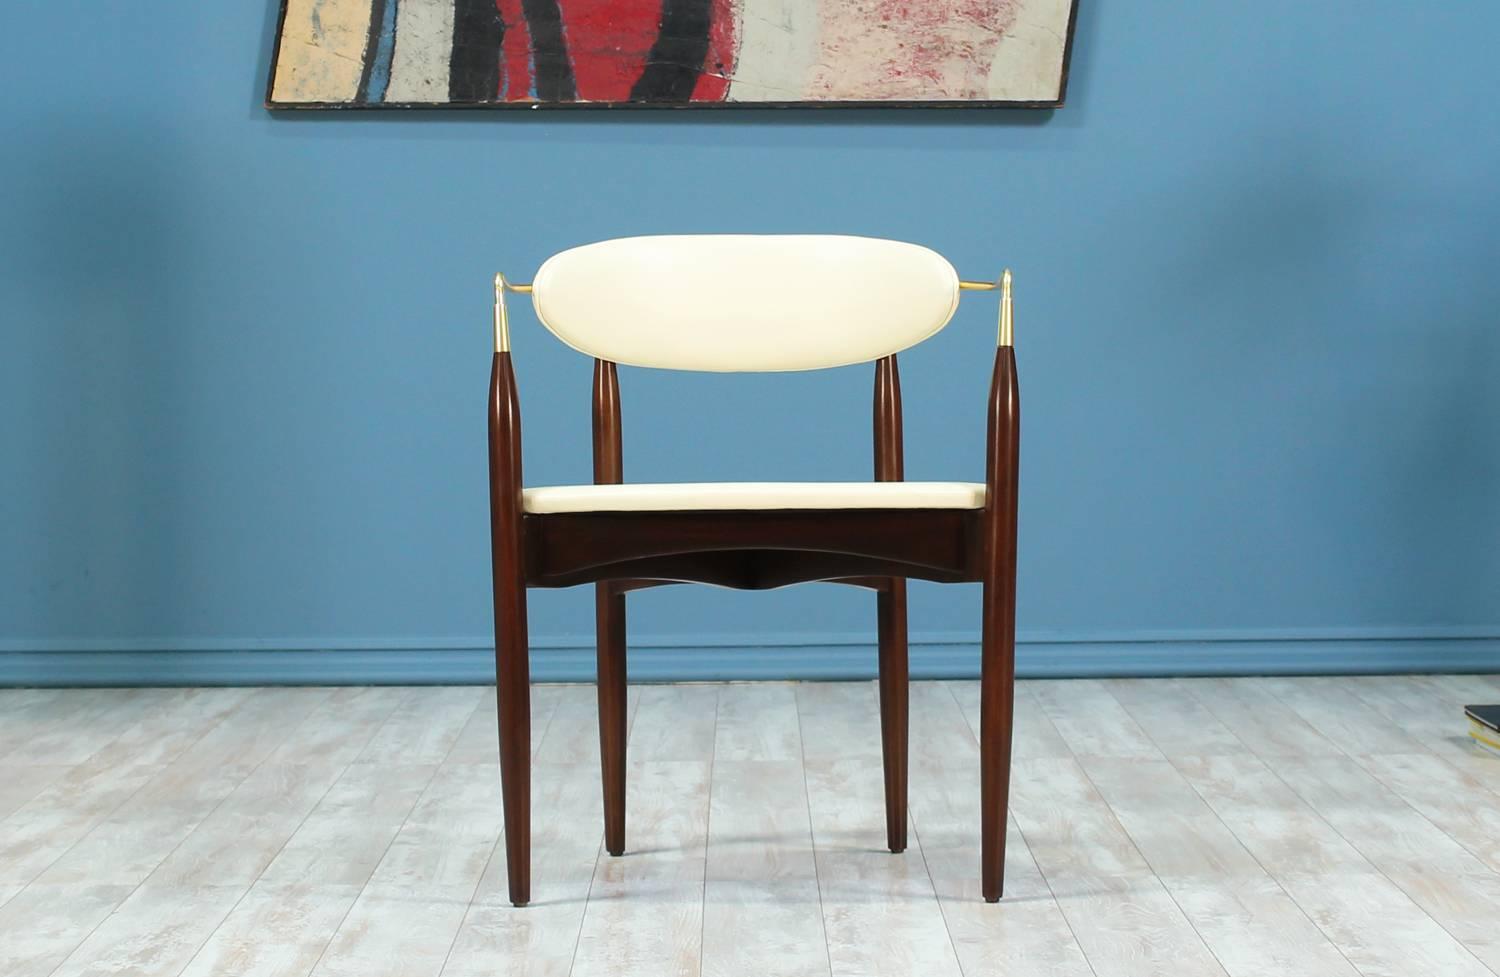 Mid Century Modern “Viscount” armchair designed by Dan Johnson for Selig in the United States circa 1950’s. This elegant design features a newly refinished walnut wood frame and freshly polished tubular brass arms. The upholstery is new full grain